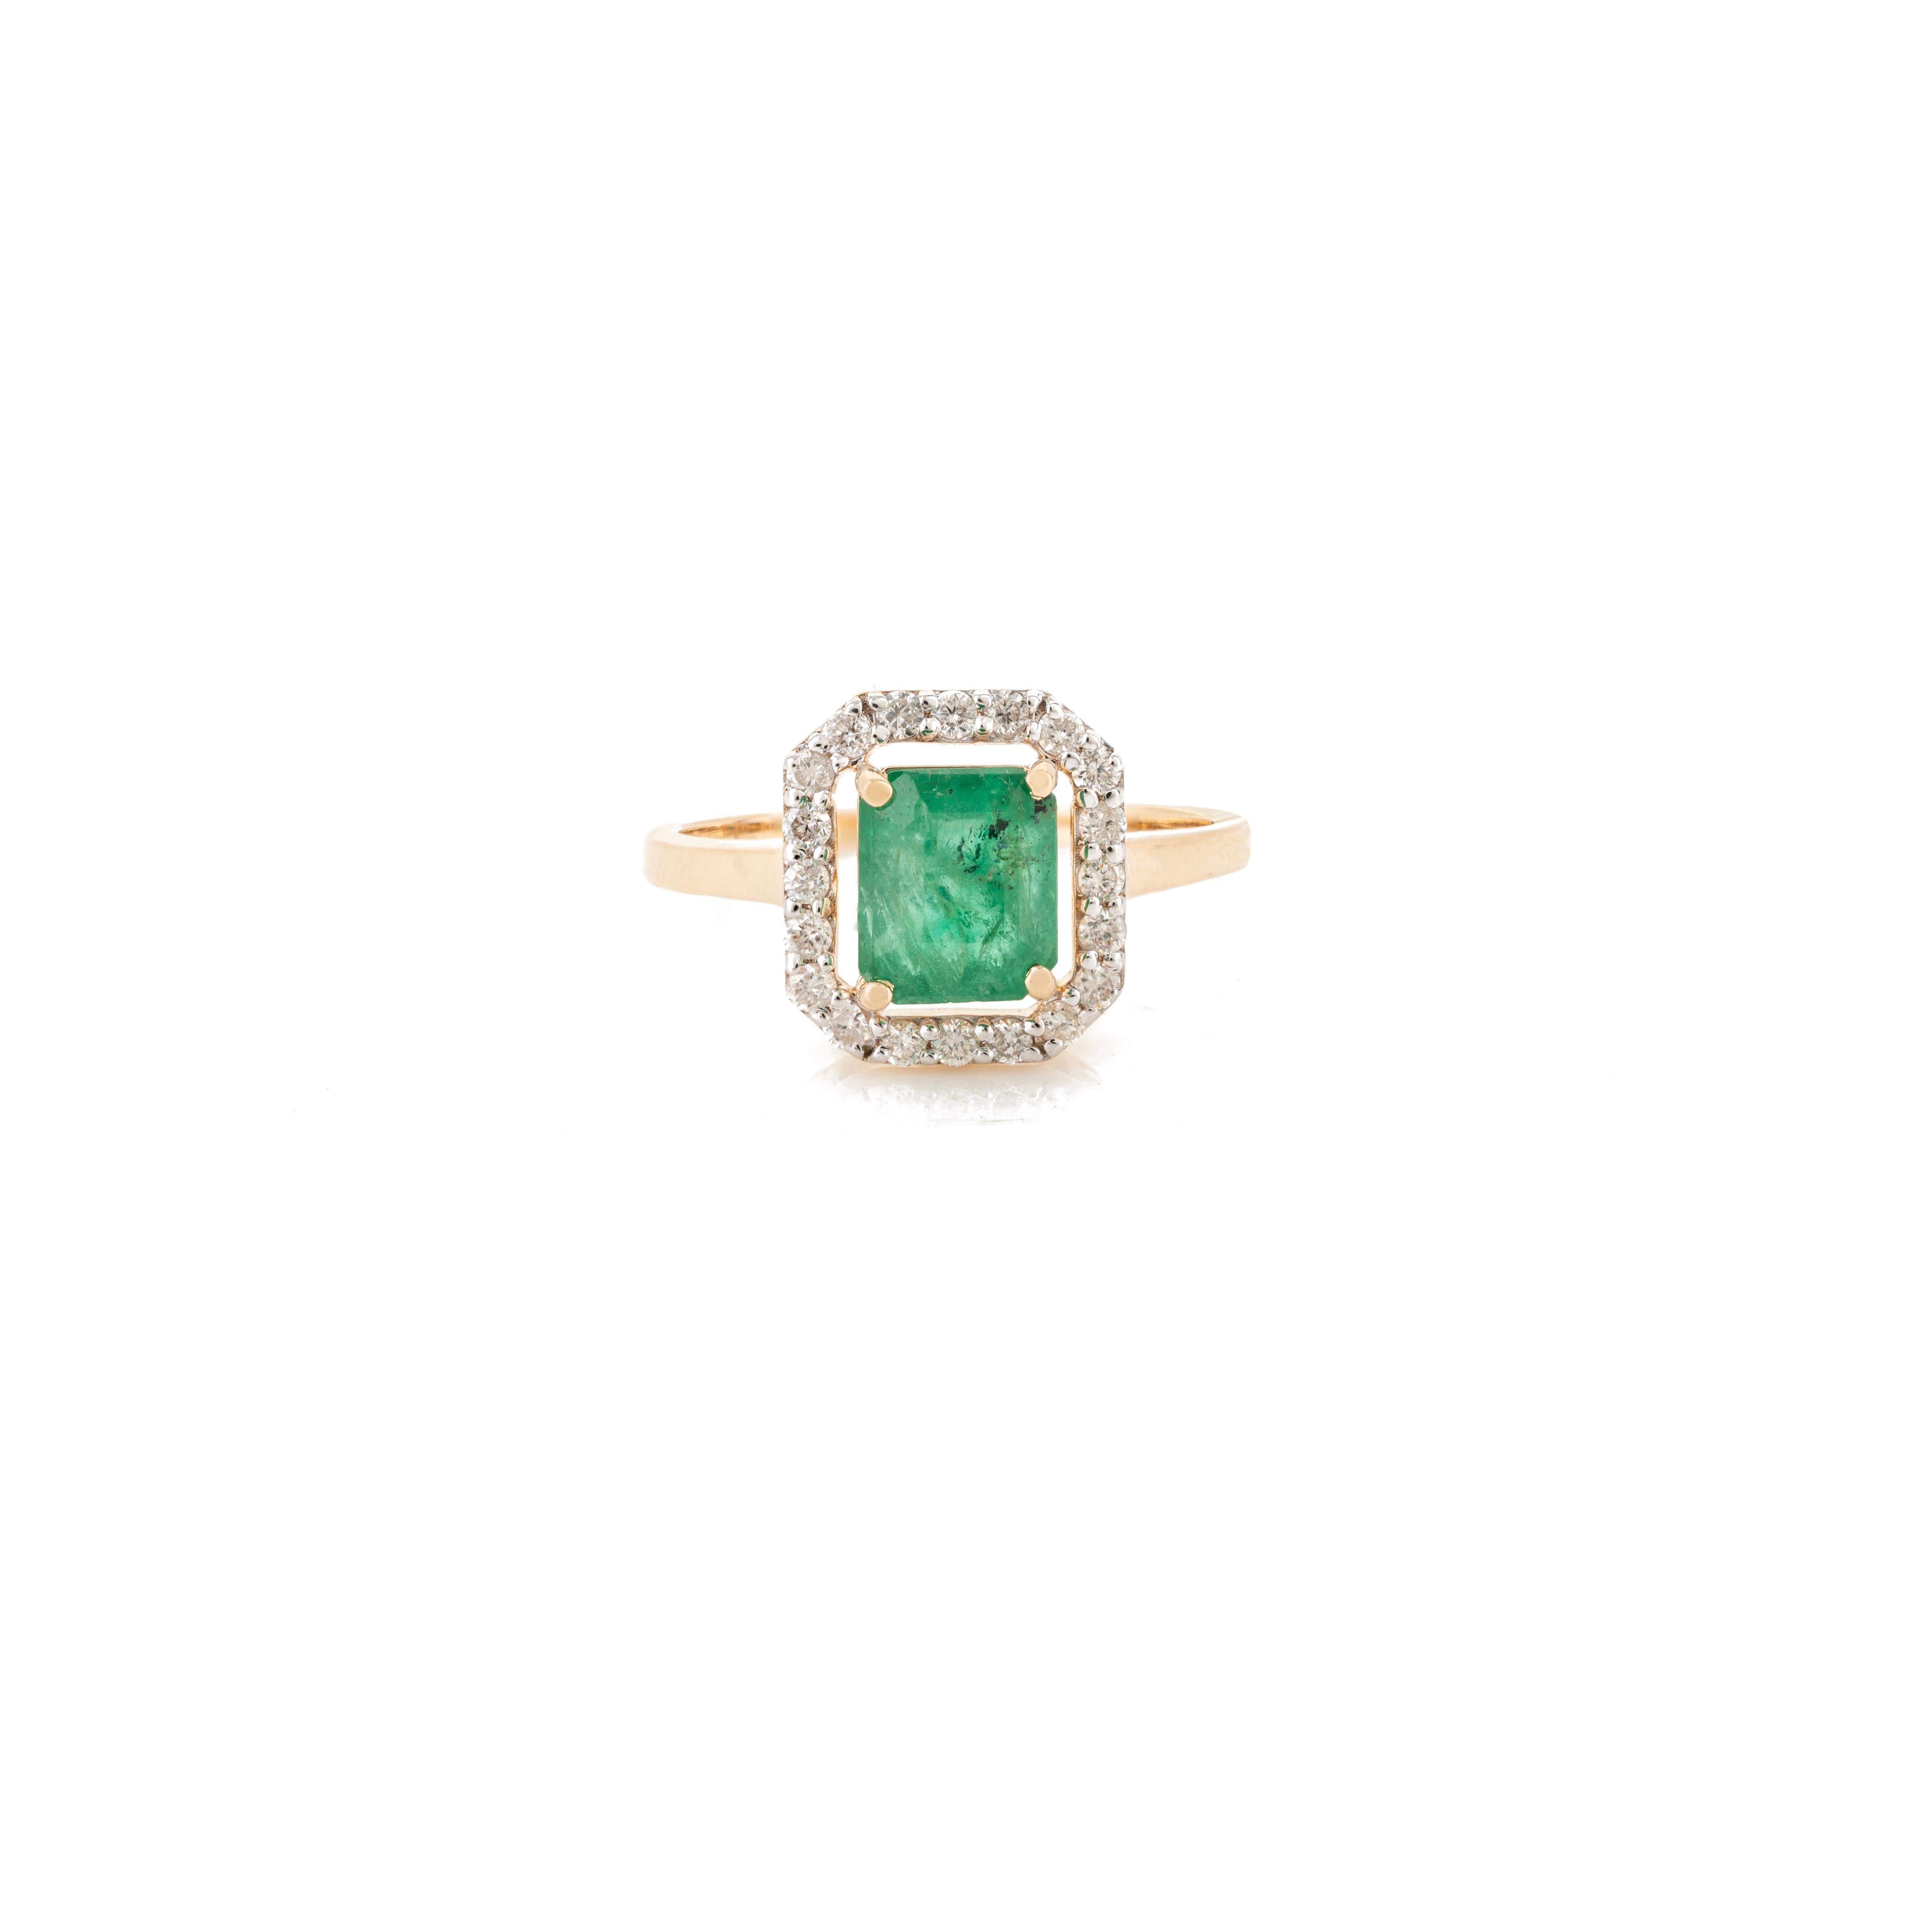 For Sale:  1.5 Carat Octagon Emerald Halo Diamond Wedding Ring in 18k Yellow Gold 3